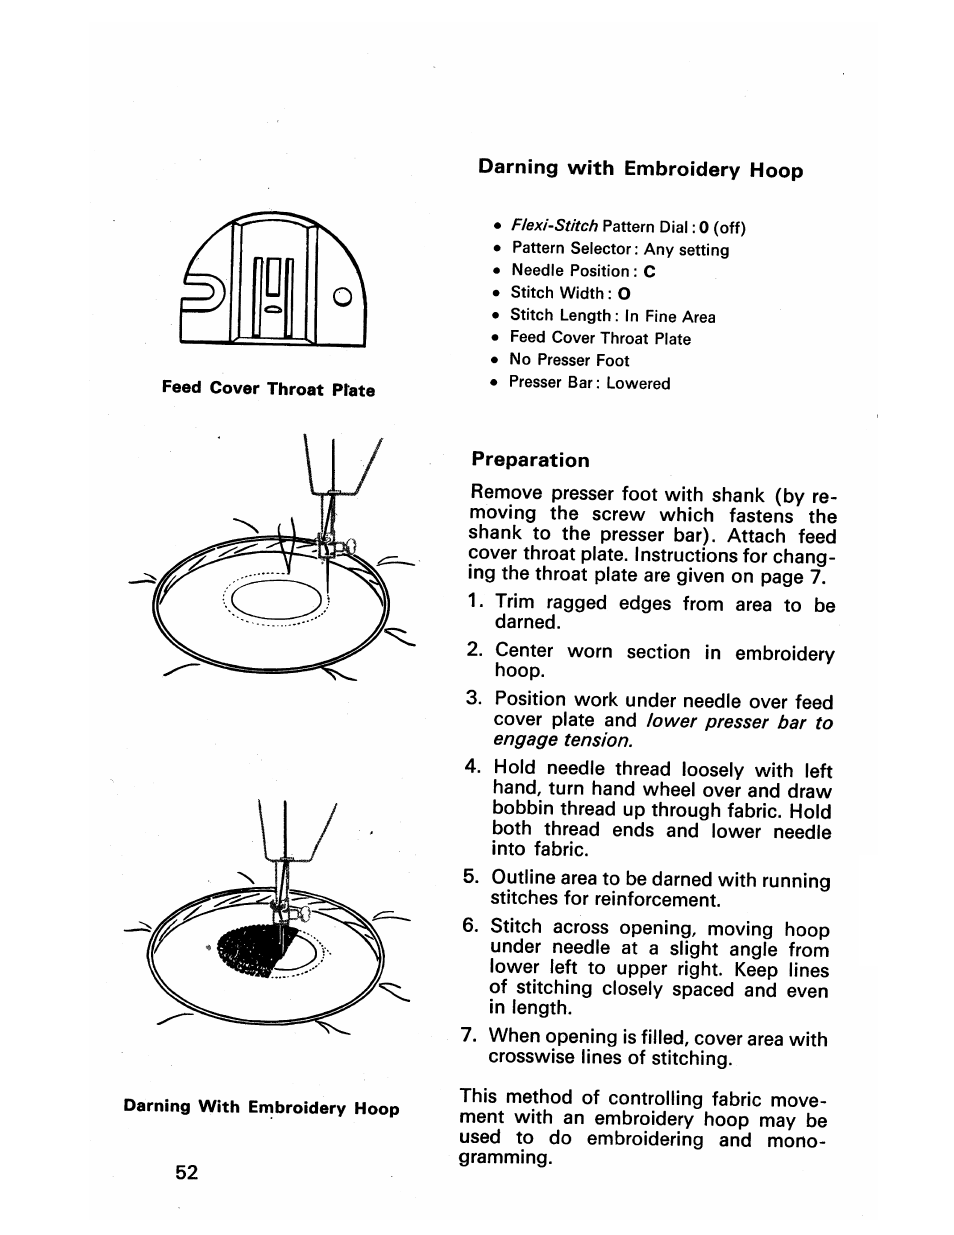 Darning with embroidery hoop, Preparation | SINGER 413 User Manual | Page 54 / 64